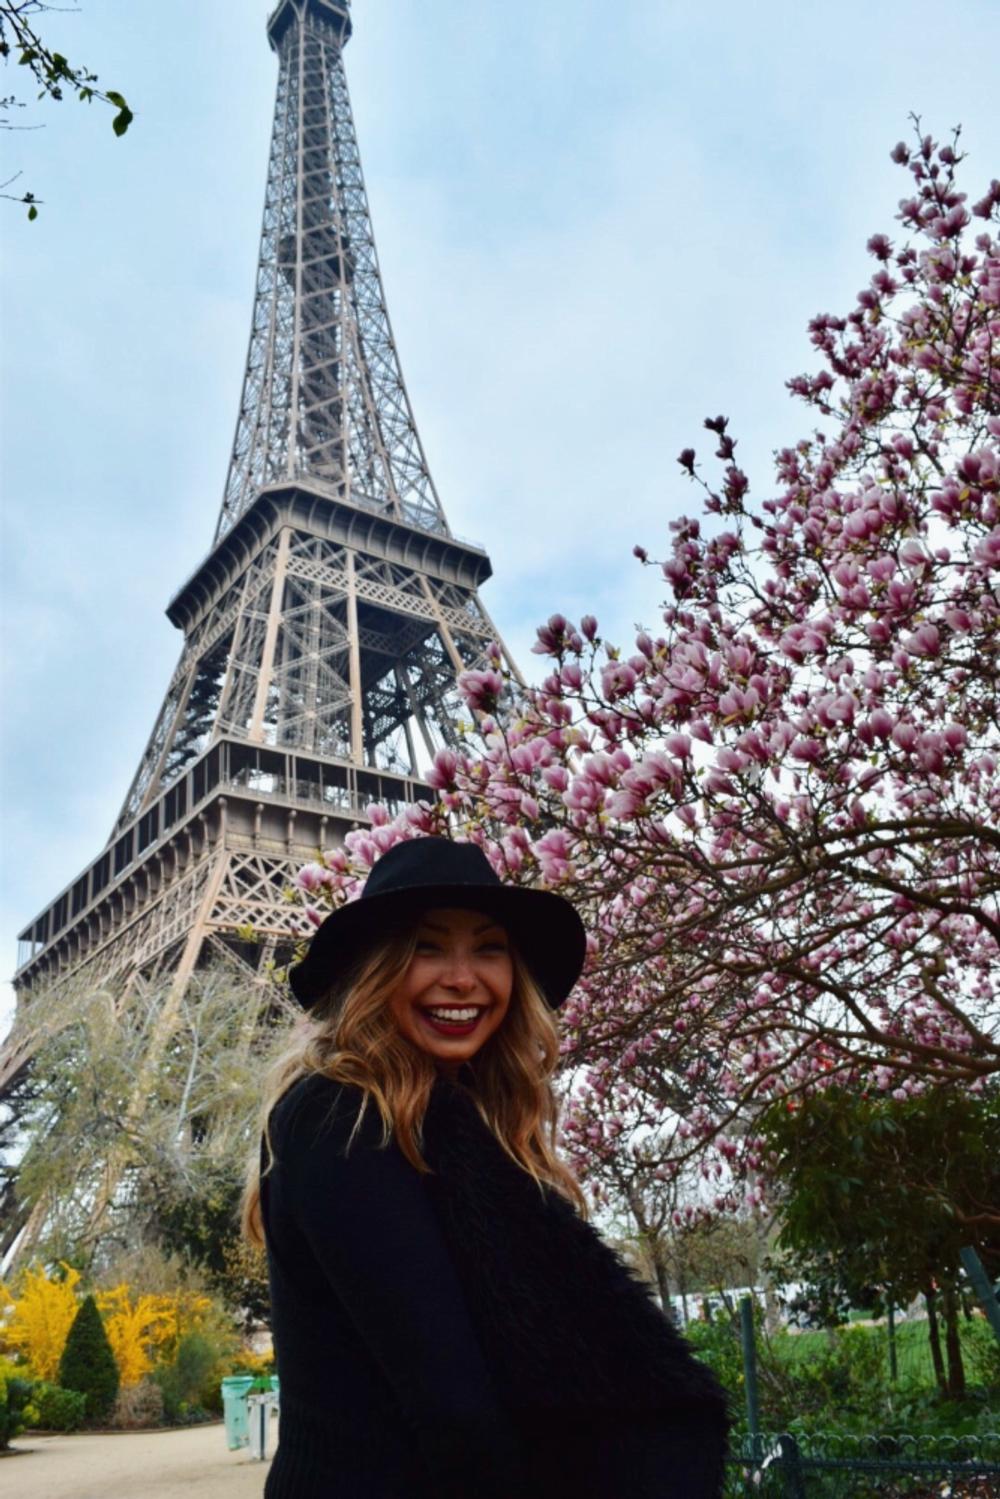 Girl smiling in front of Eiffel Tower in Paris